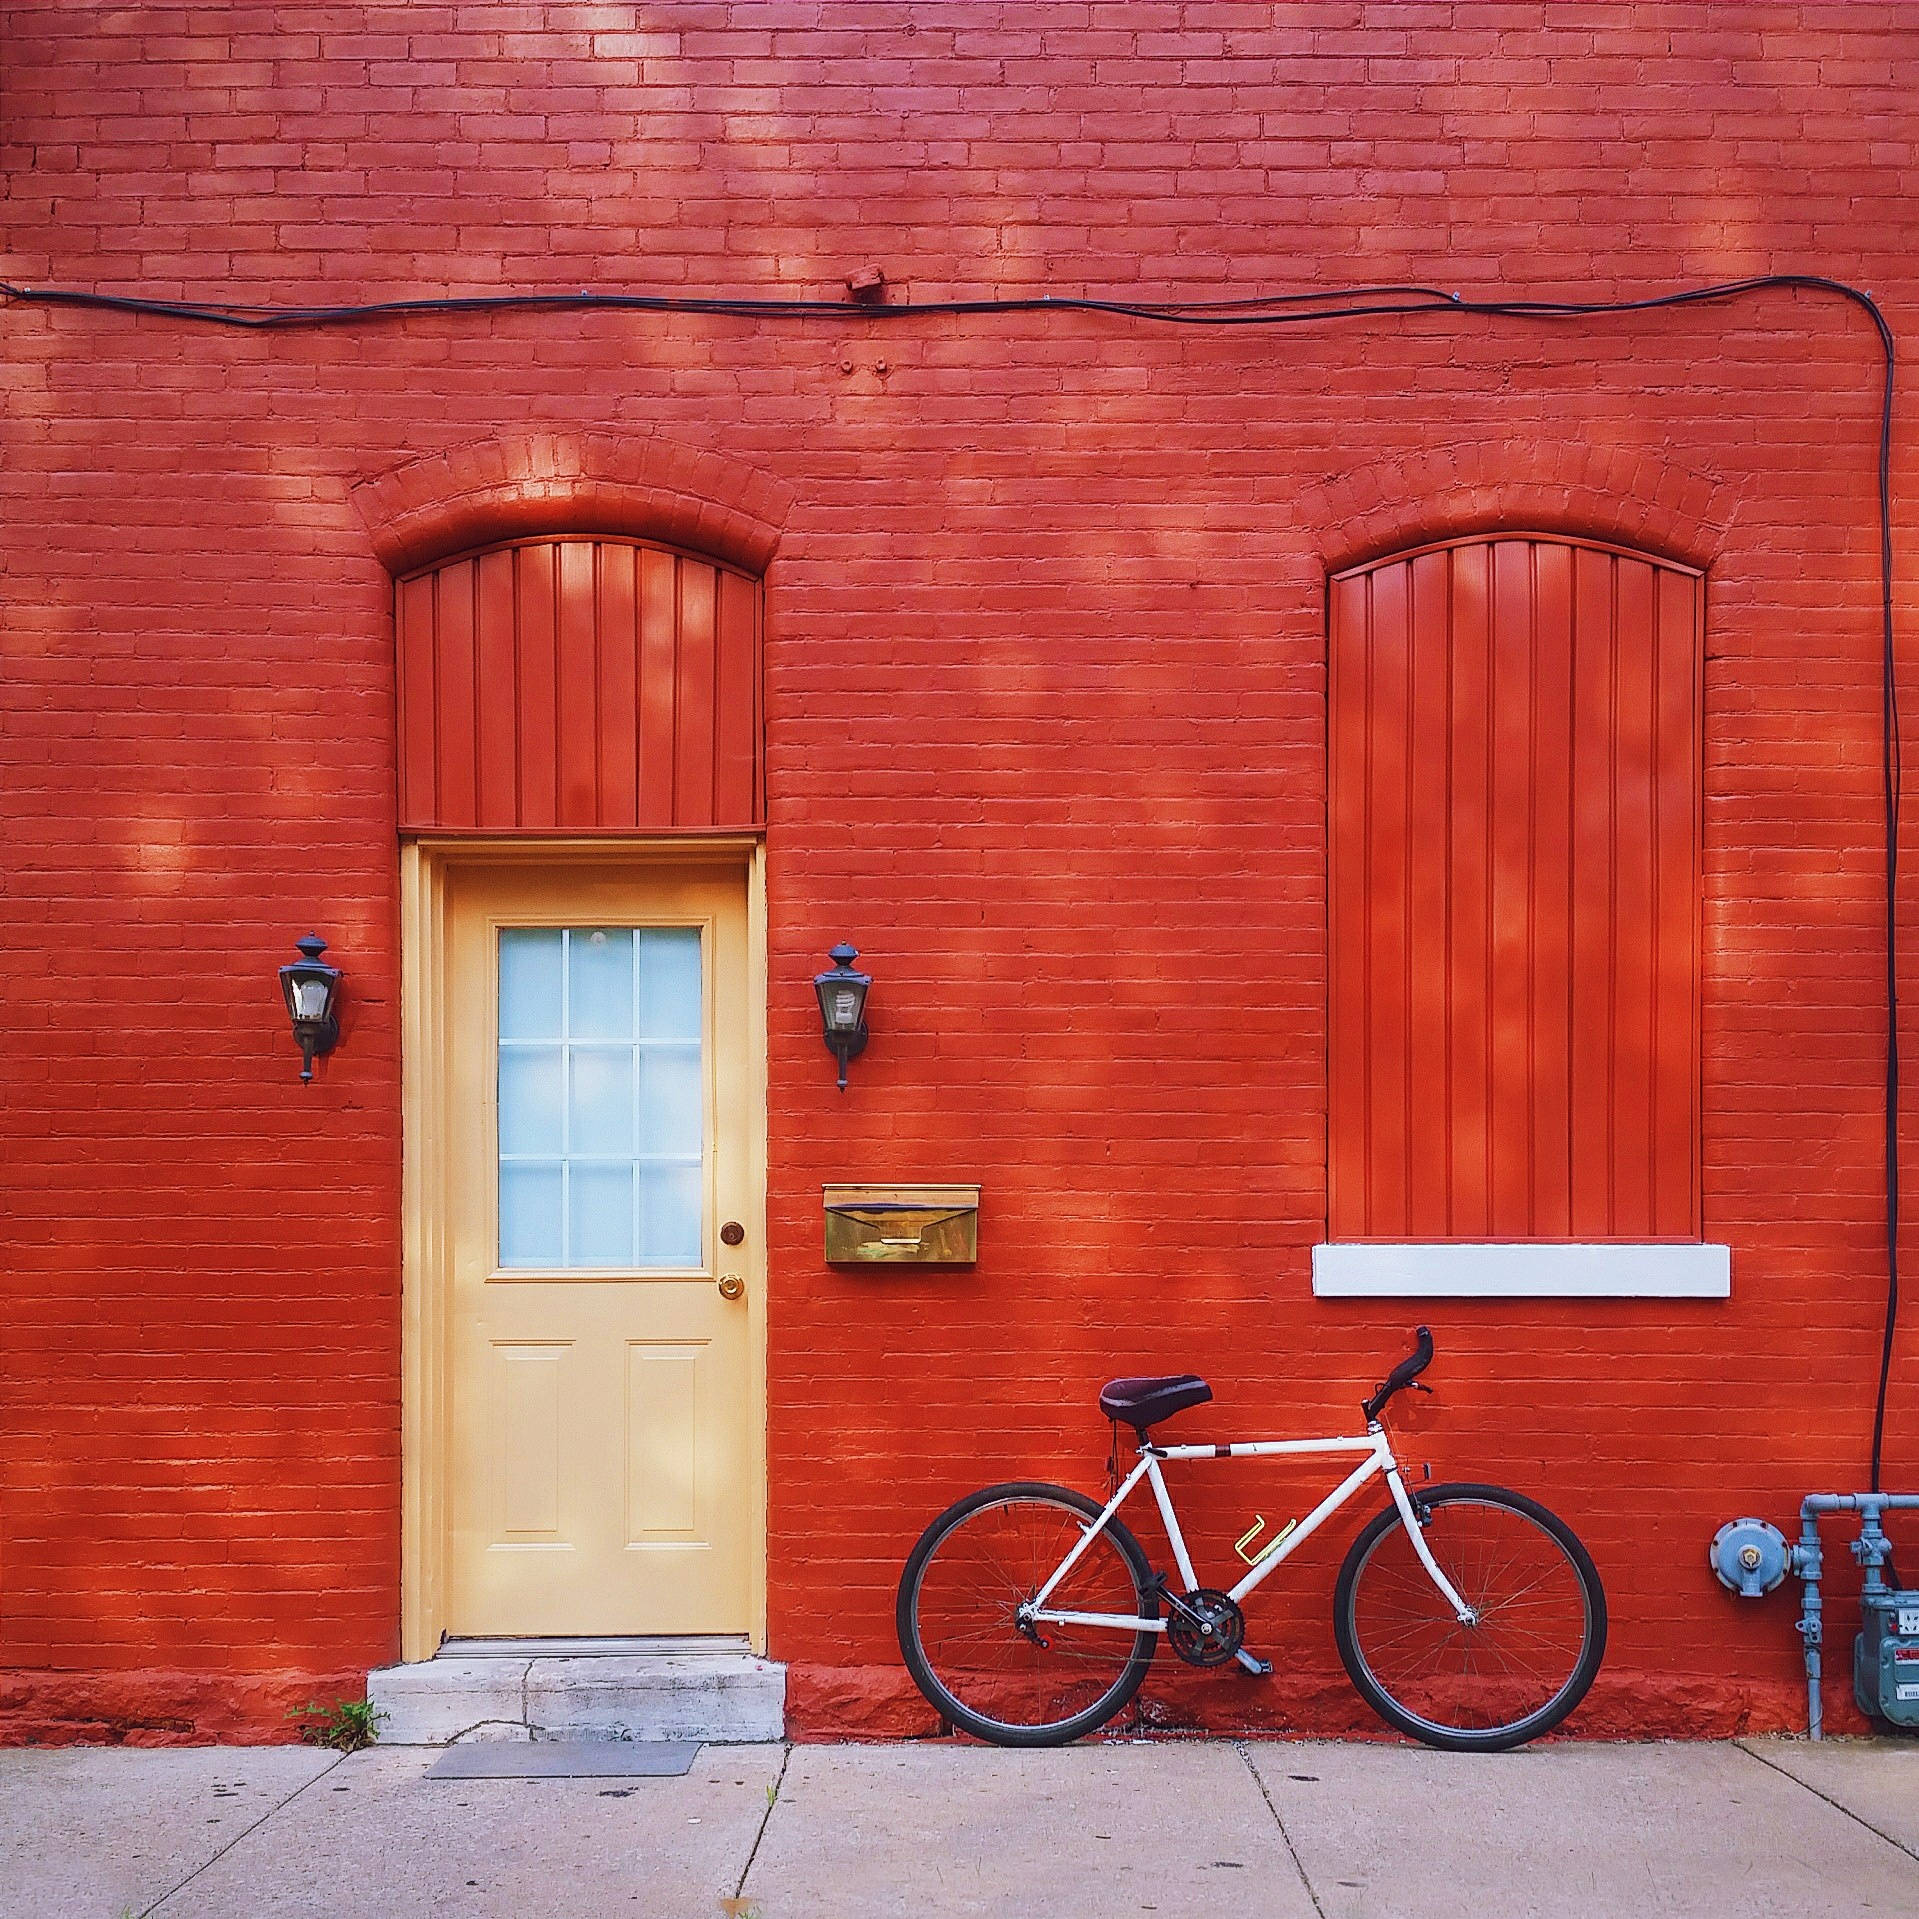 Stunning Red Building and Bicycle Wallpaper